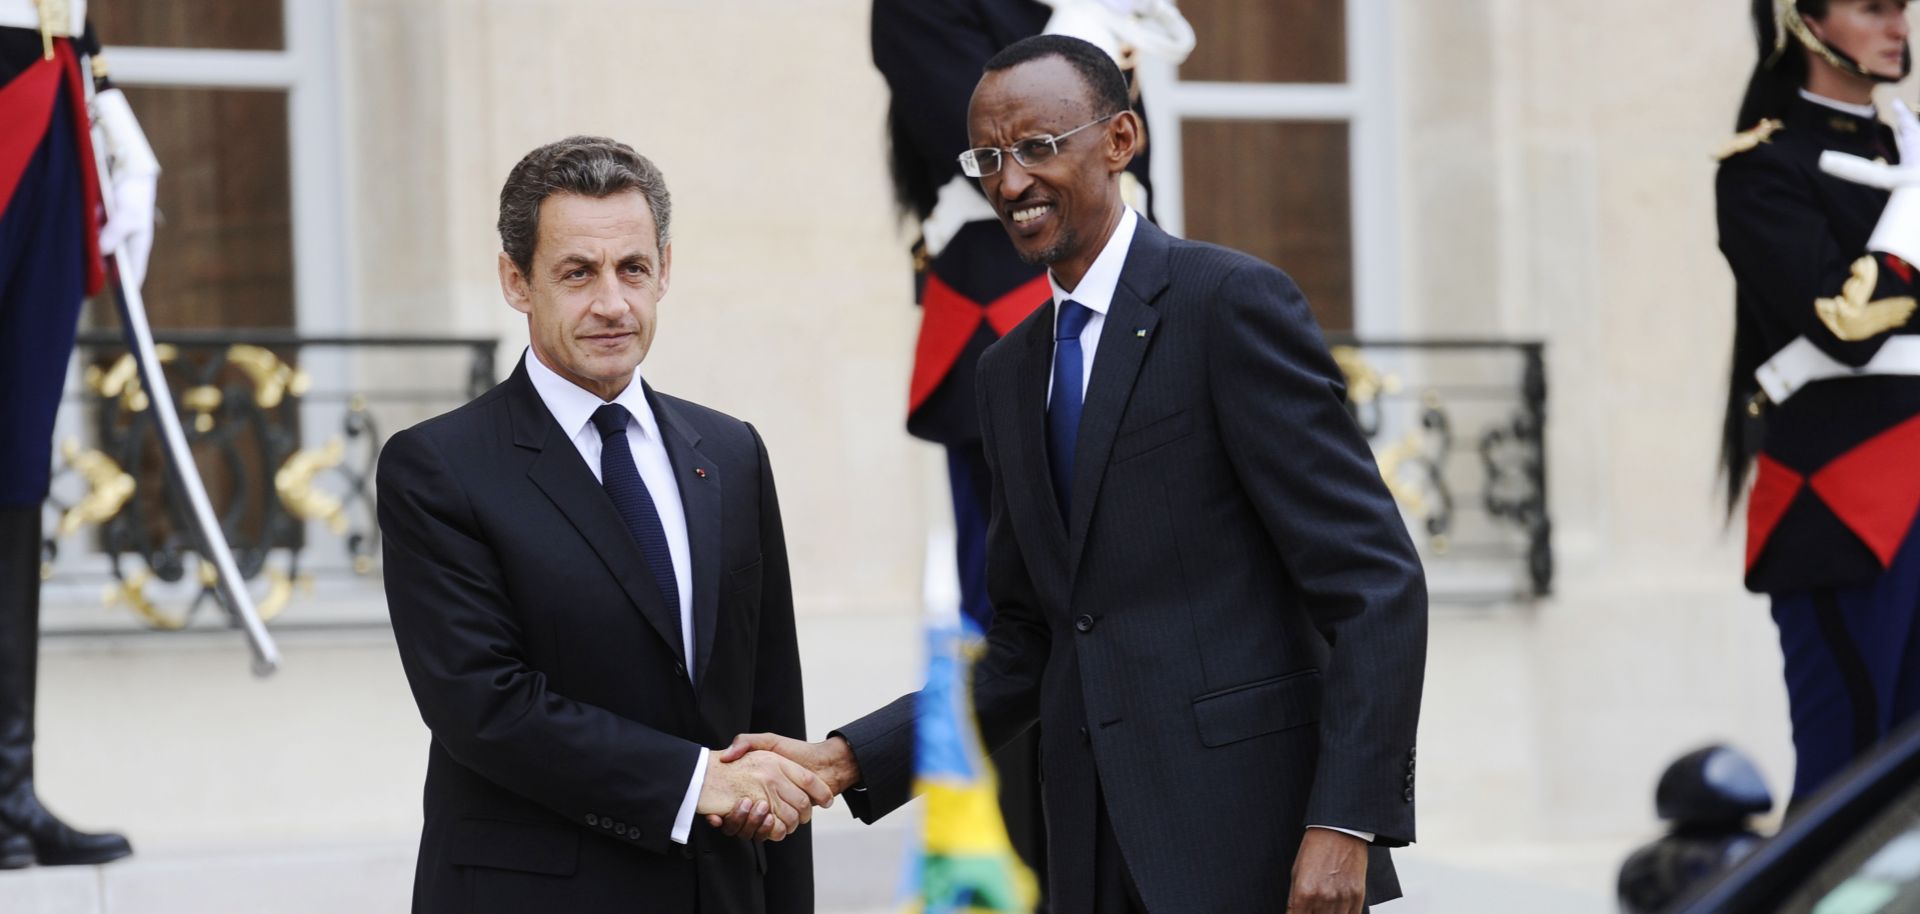 Rwandan President Paul Kagame visited France for the first time since the 1994 Rwandan genocide in September 2011. Here, then-French President Nicolas Sarkozy welcomes Kagame to the Elysee Palace.